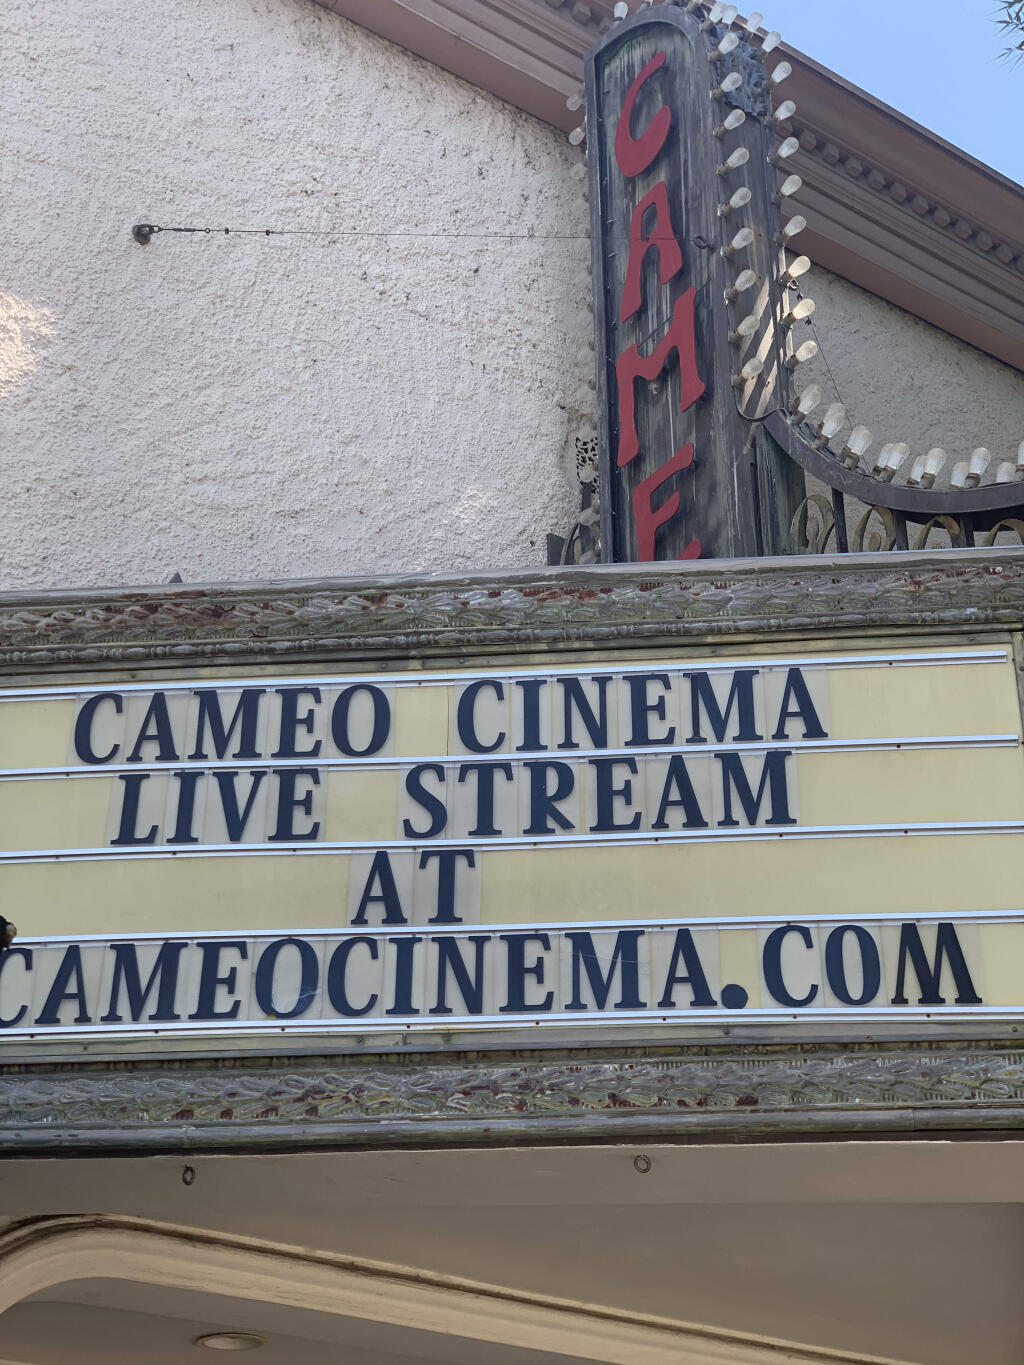 Cameo Cinema in St. Helena is the oldest single-screen theater in the U.S. It was built in 1913 and has 140 seats, but only a fraction have been filled since the theater was allowed to reopen in the pandemic, even at permitted half-capacity since late October. (courtesy photo)